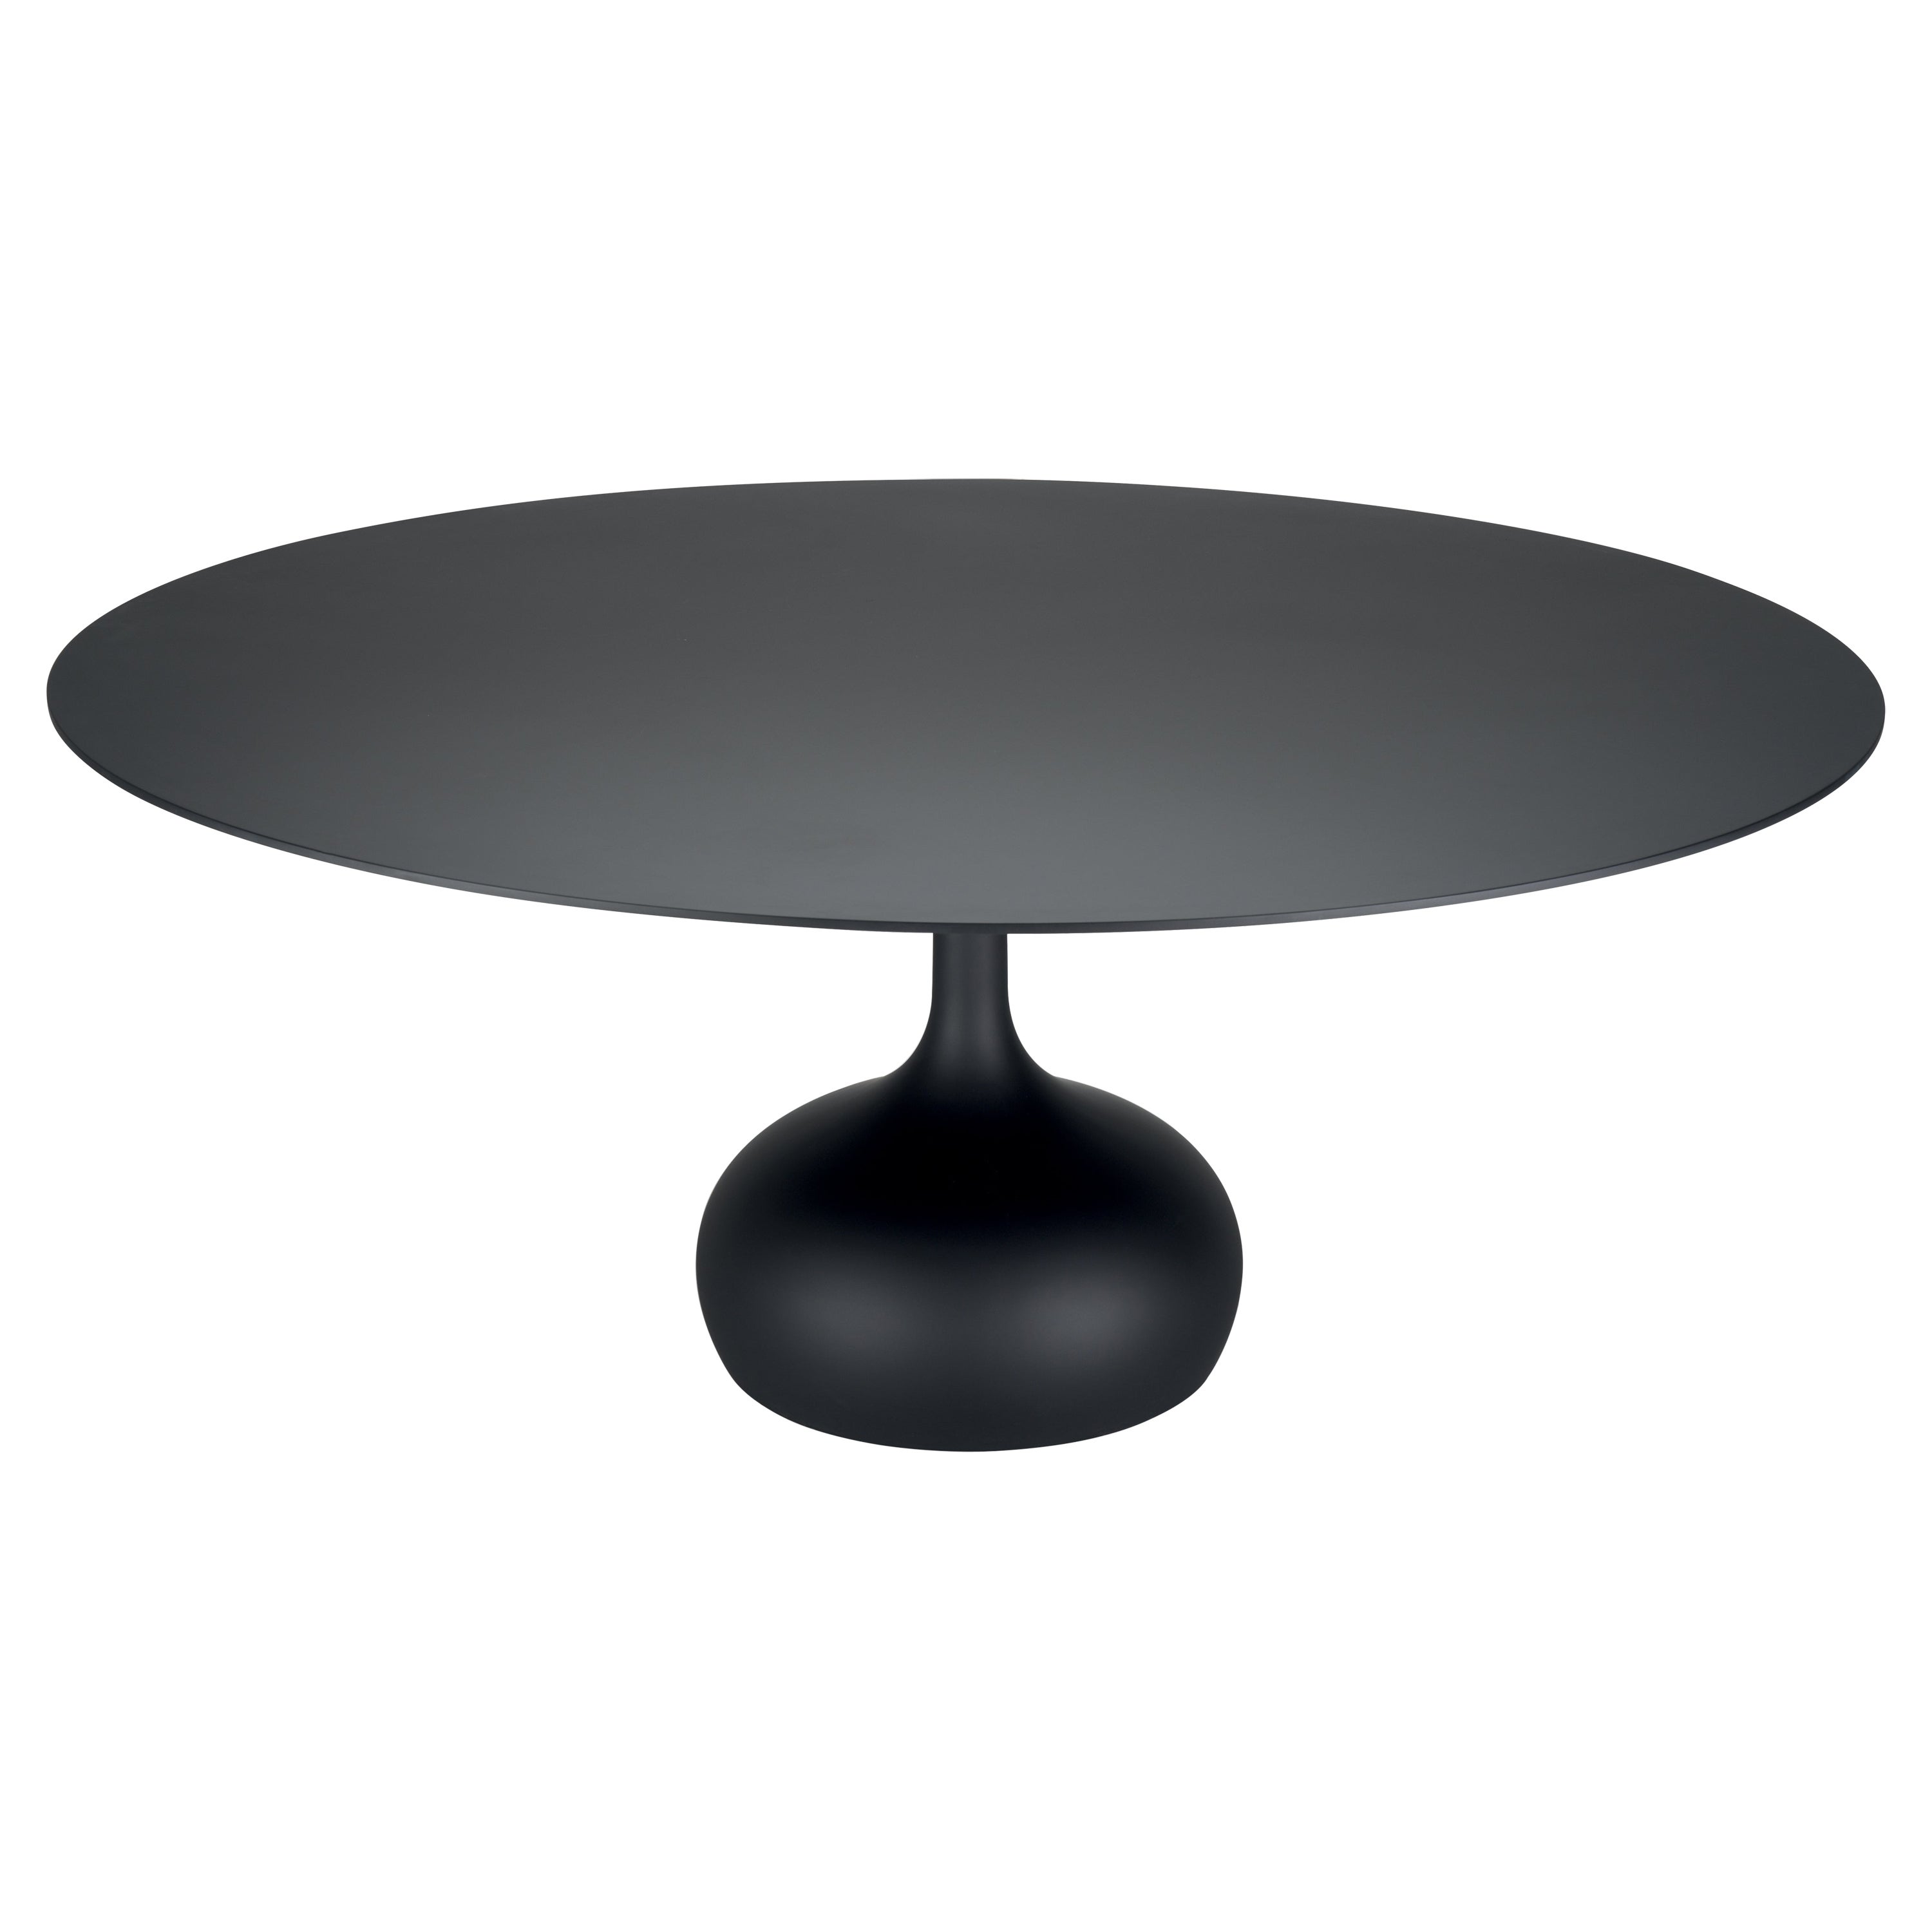 Alias 011 Saen Table in Black Lacquered MDF Top by Gabriele e Oscar Buratti For Sale